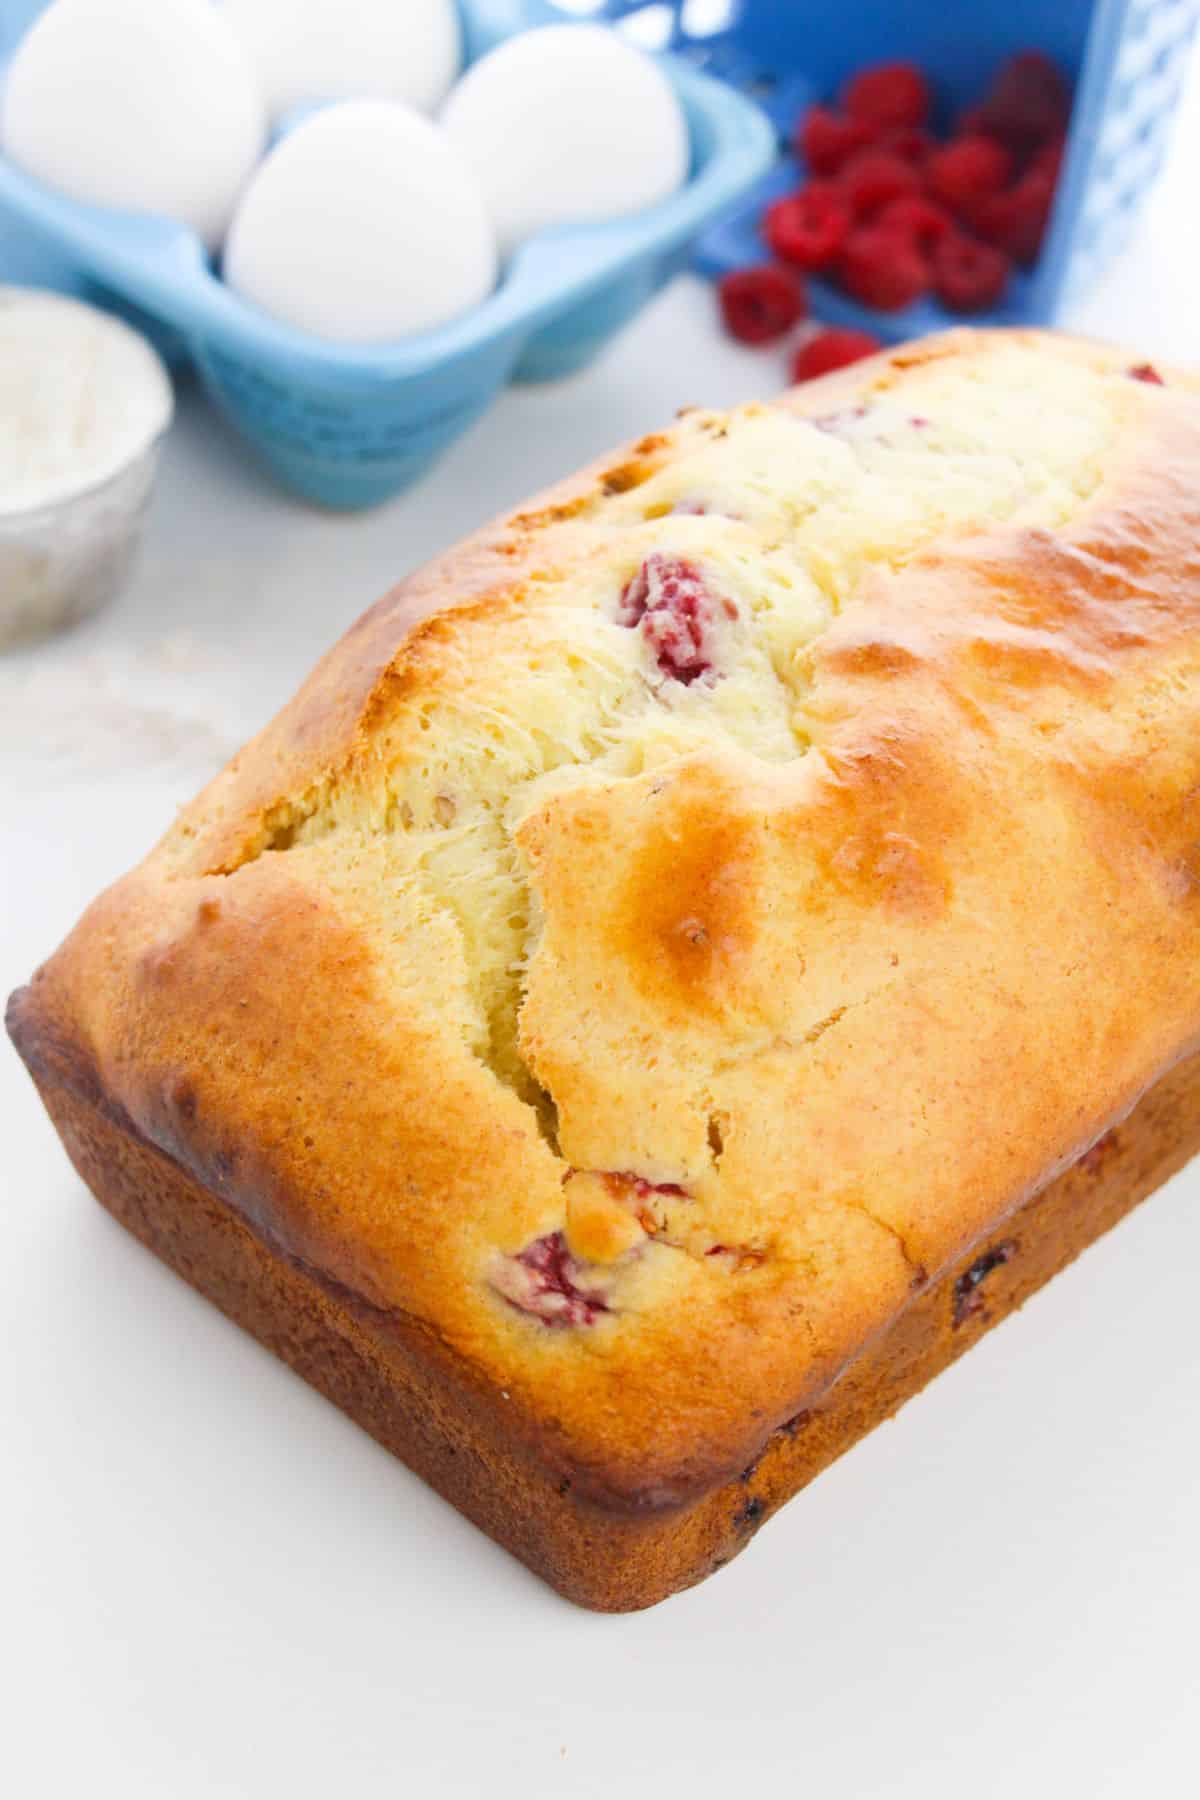 Lemon Raspberry Loaf with flour, egg and raspberries on the side